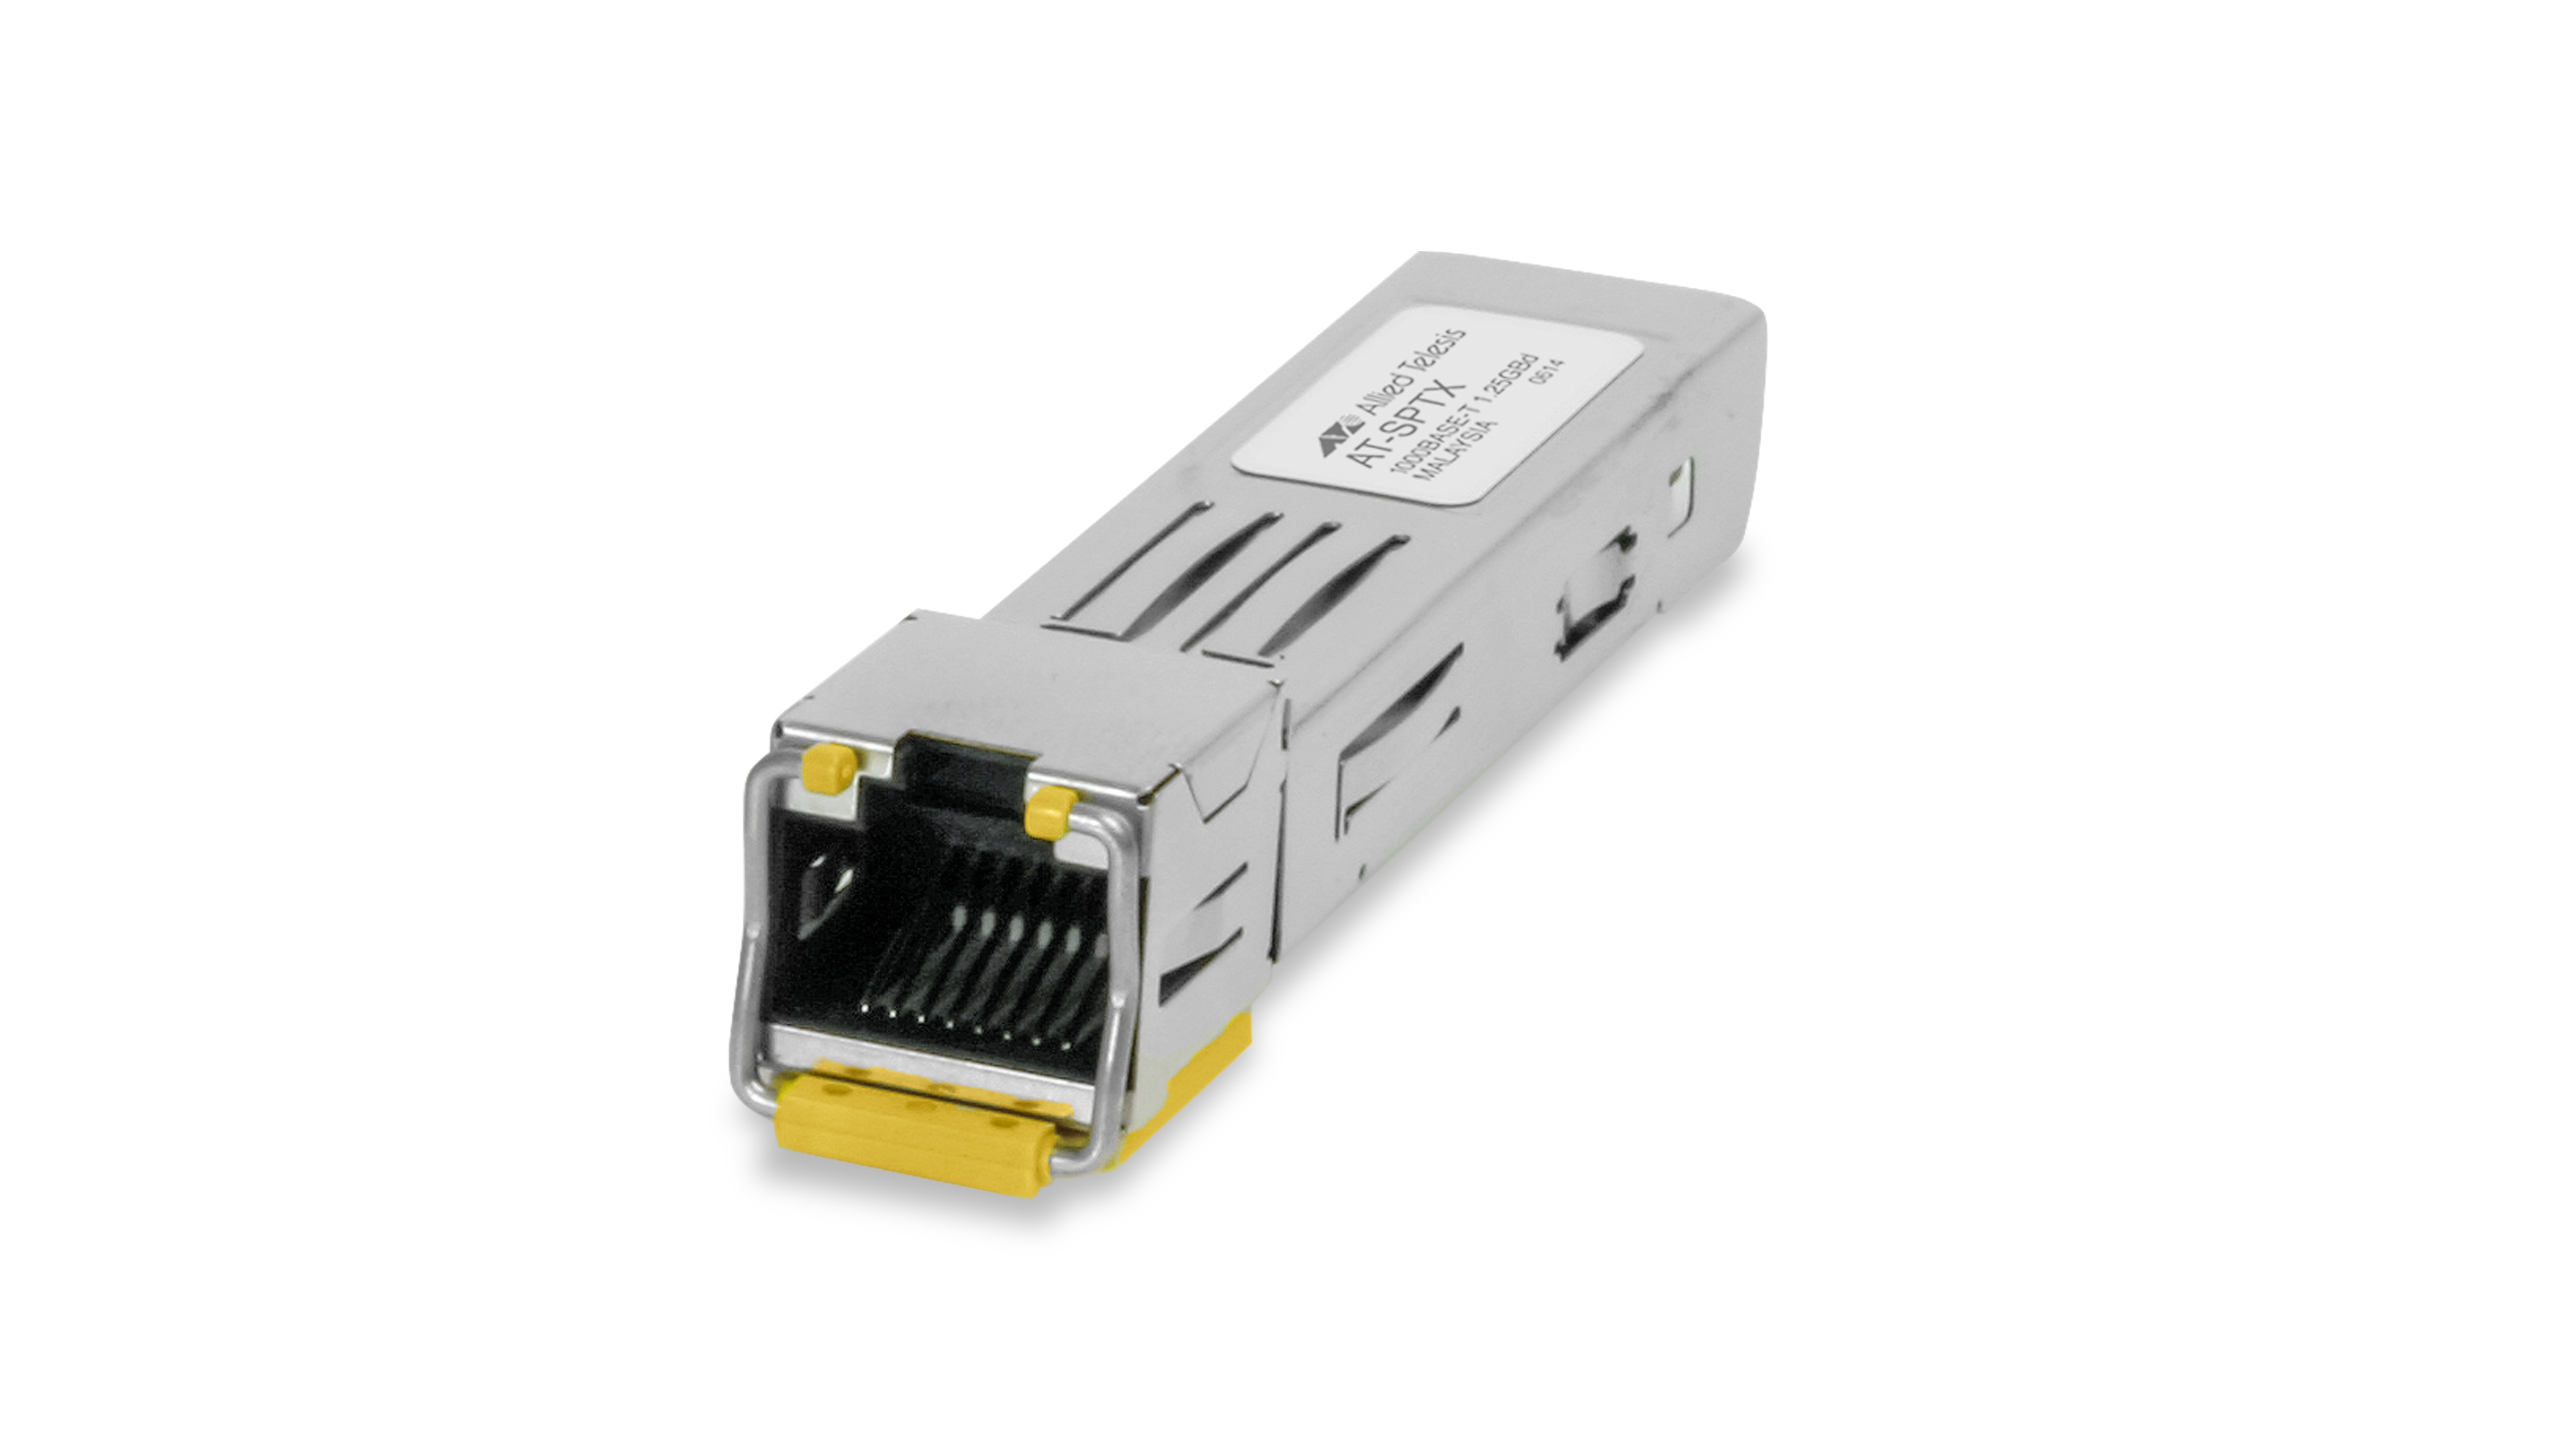 SNS at-SPTX Compatible with Allied Telesis at-SPTX 1000BASE-T SFP Copper Transceiver Module 